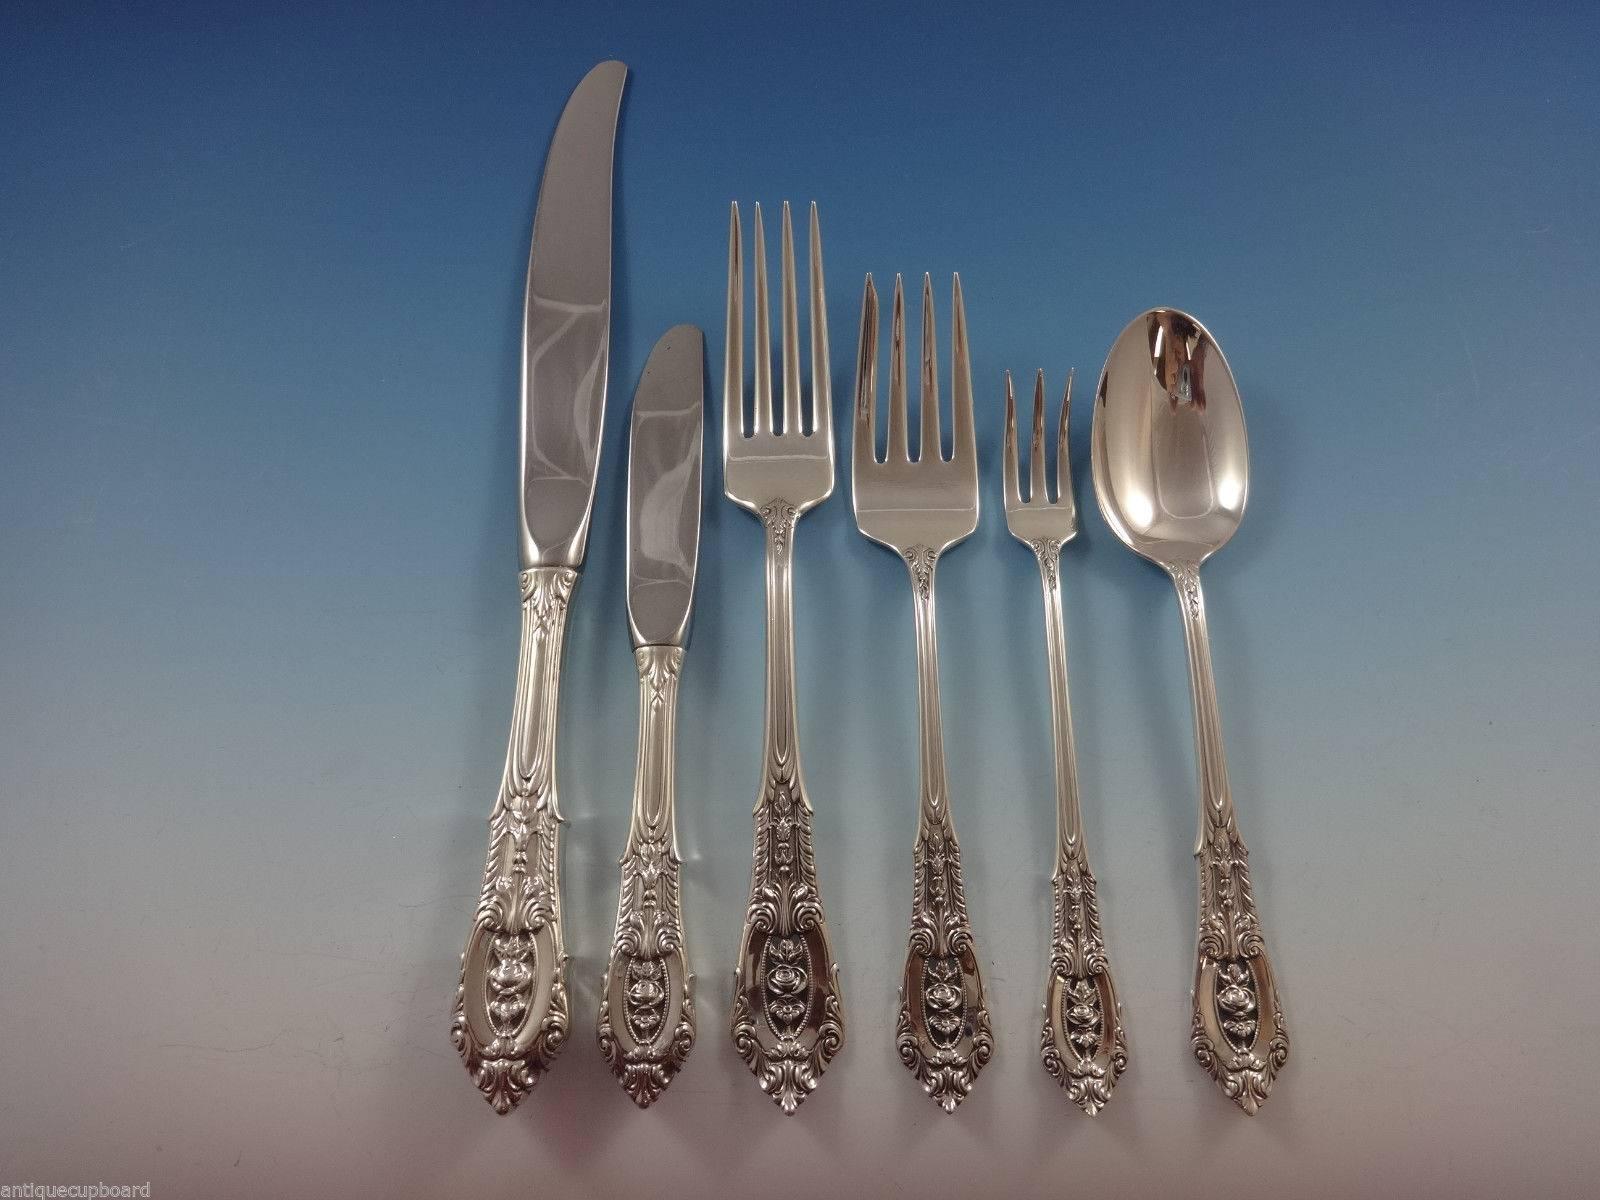 Intricate piercings and brilliant craftsmanship define this Rose Point sterling silver flatware, sure to become a treasured family heirloom. The design of silver lace and a floating rose amidst deep scrolls and shimmering dew drops will grace your